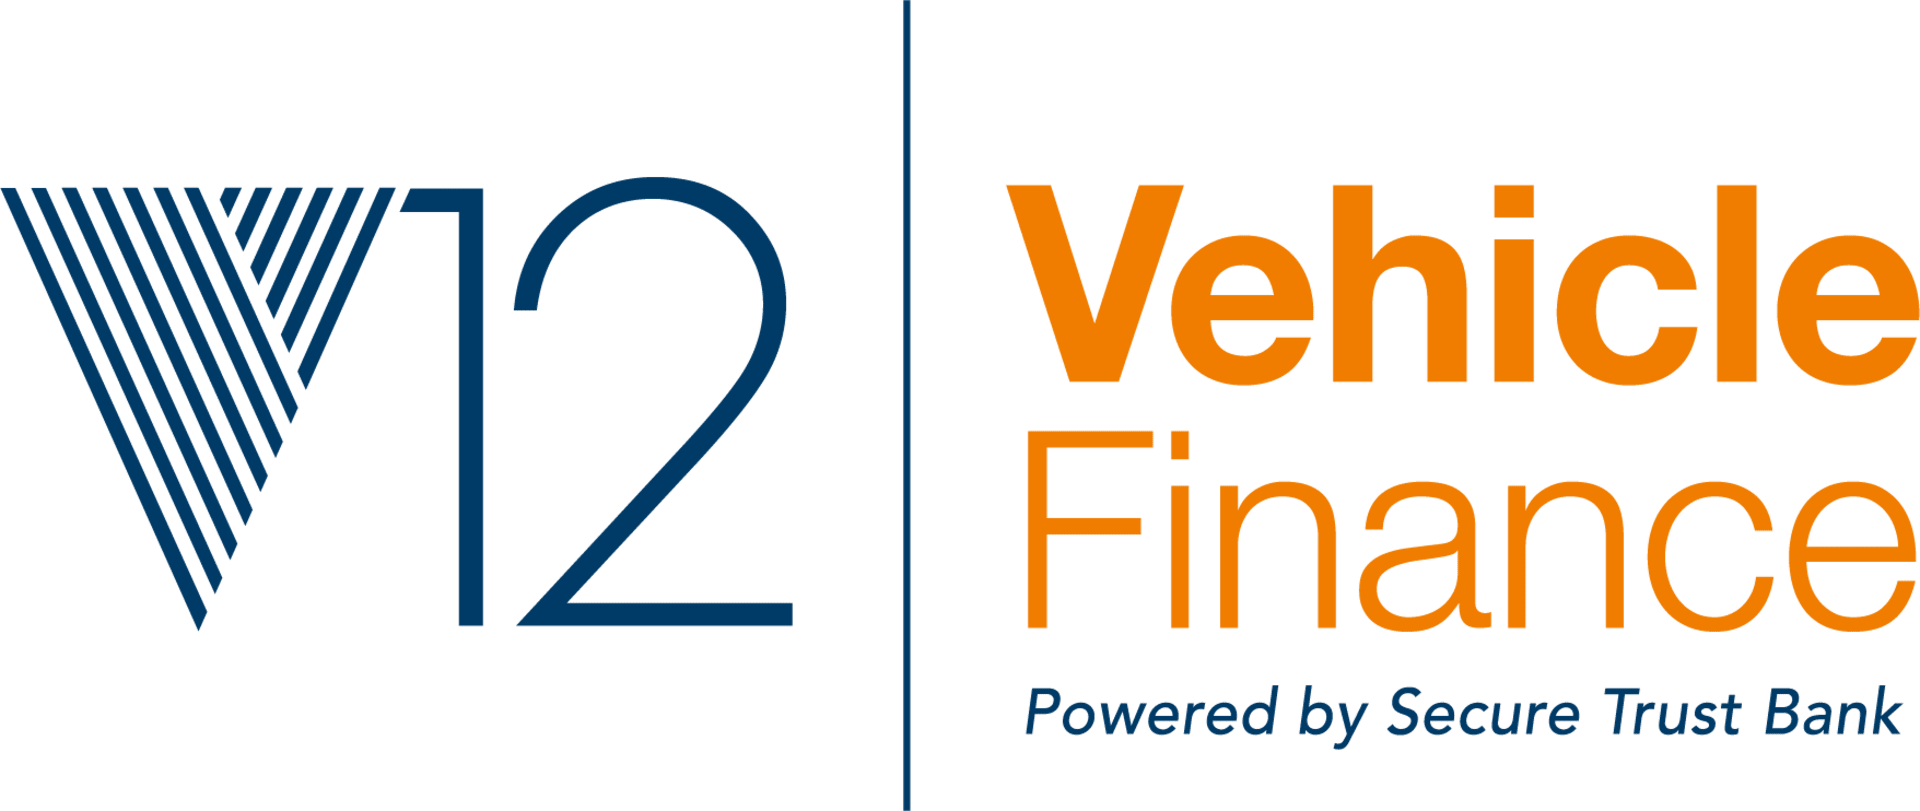 We are an Approved V12 Vehicle Finance Partner